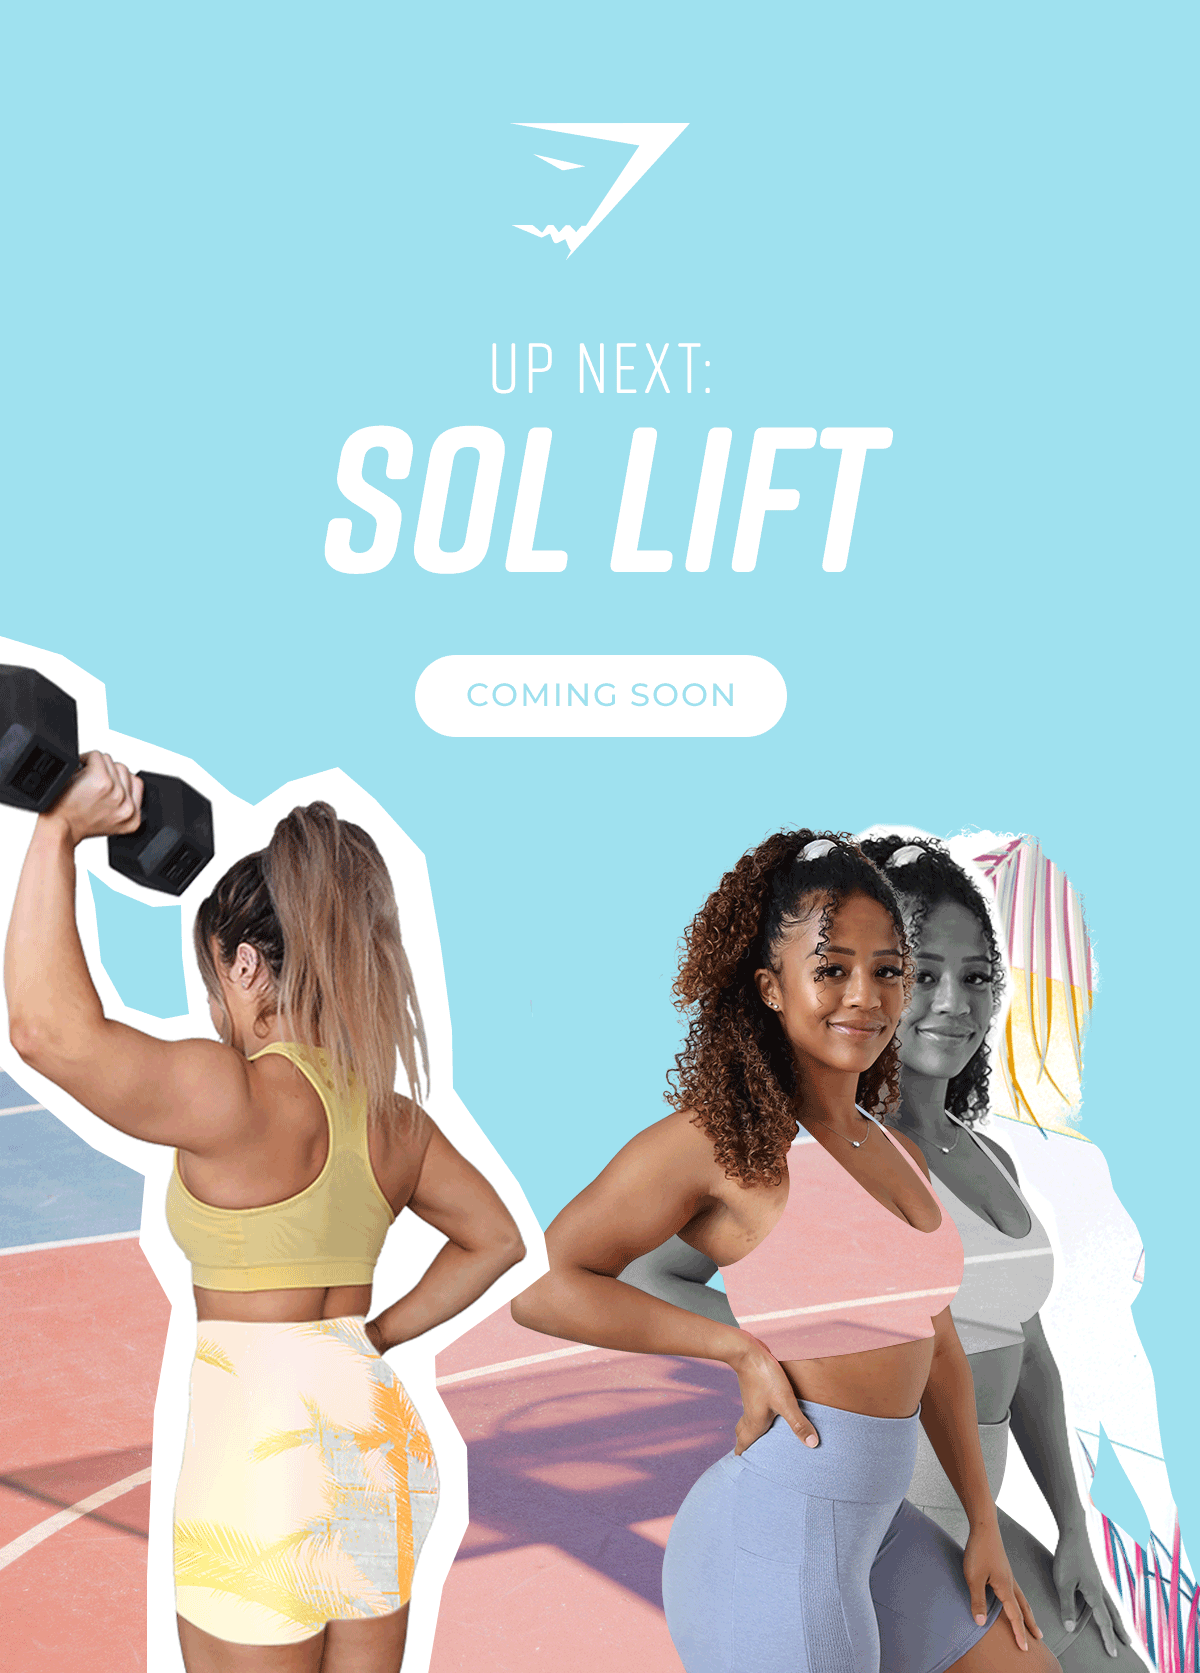 Up next: SOL LIFT. Coming soon.